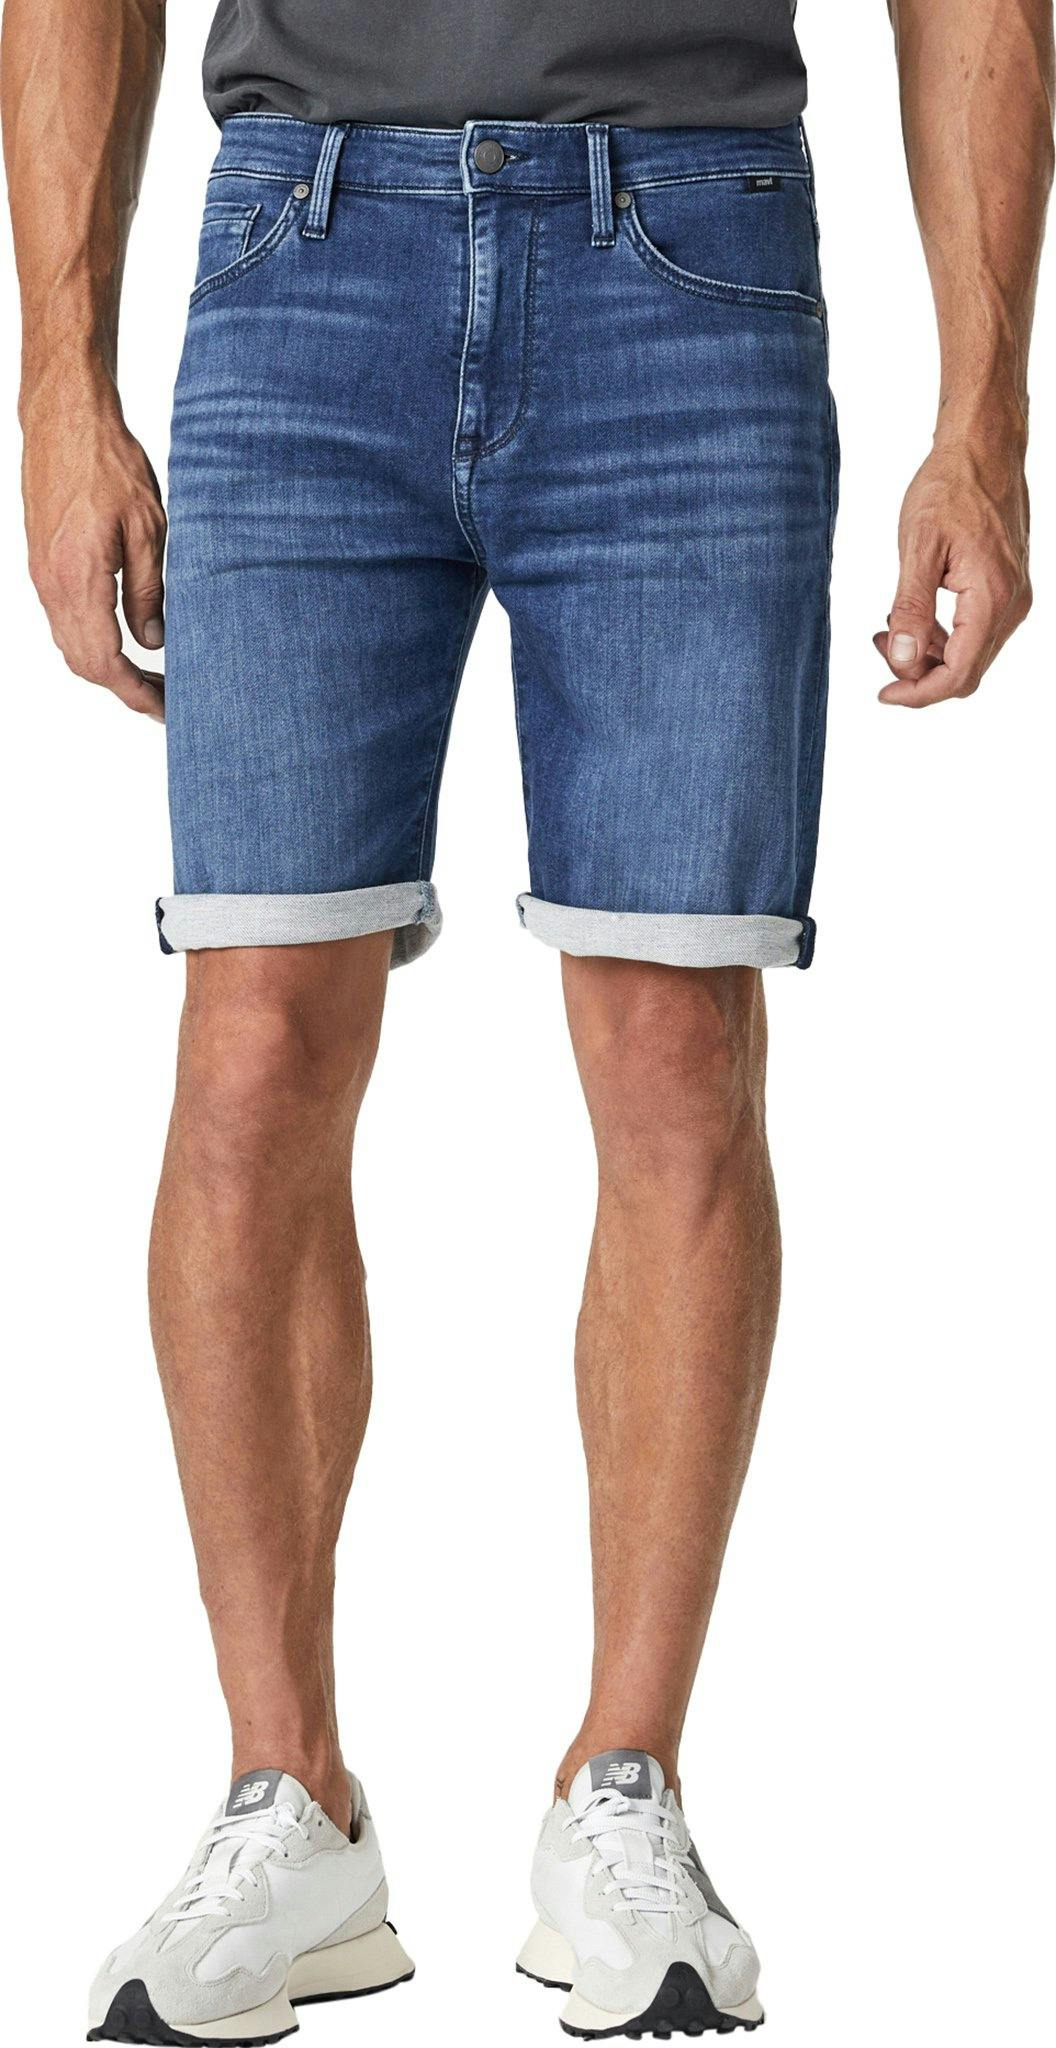 Product image for Brian Cuffed Shorts - Men's